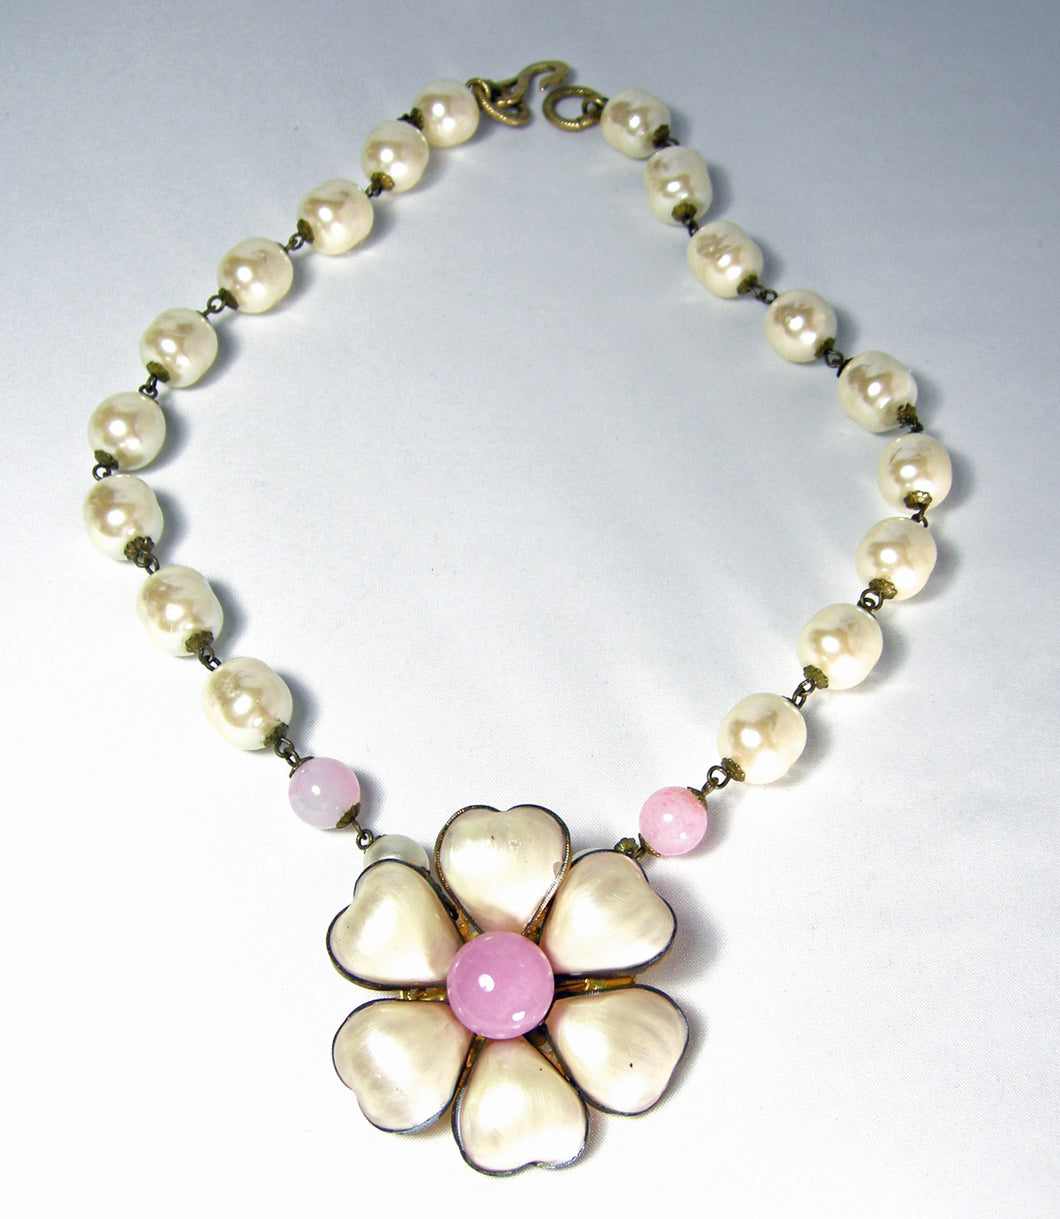 Vintage CHANEL faux pearl necklace, extra long necklace with